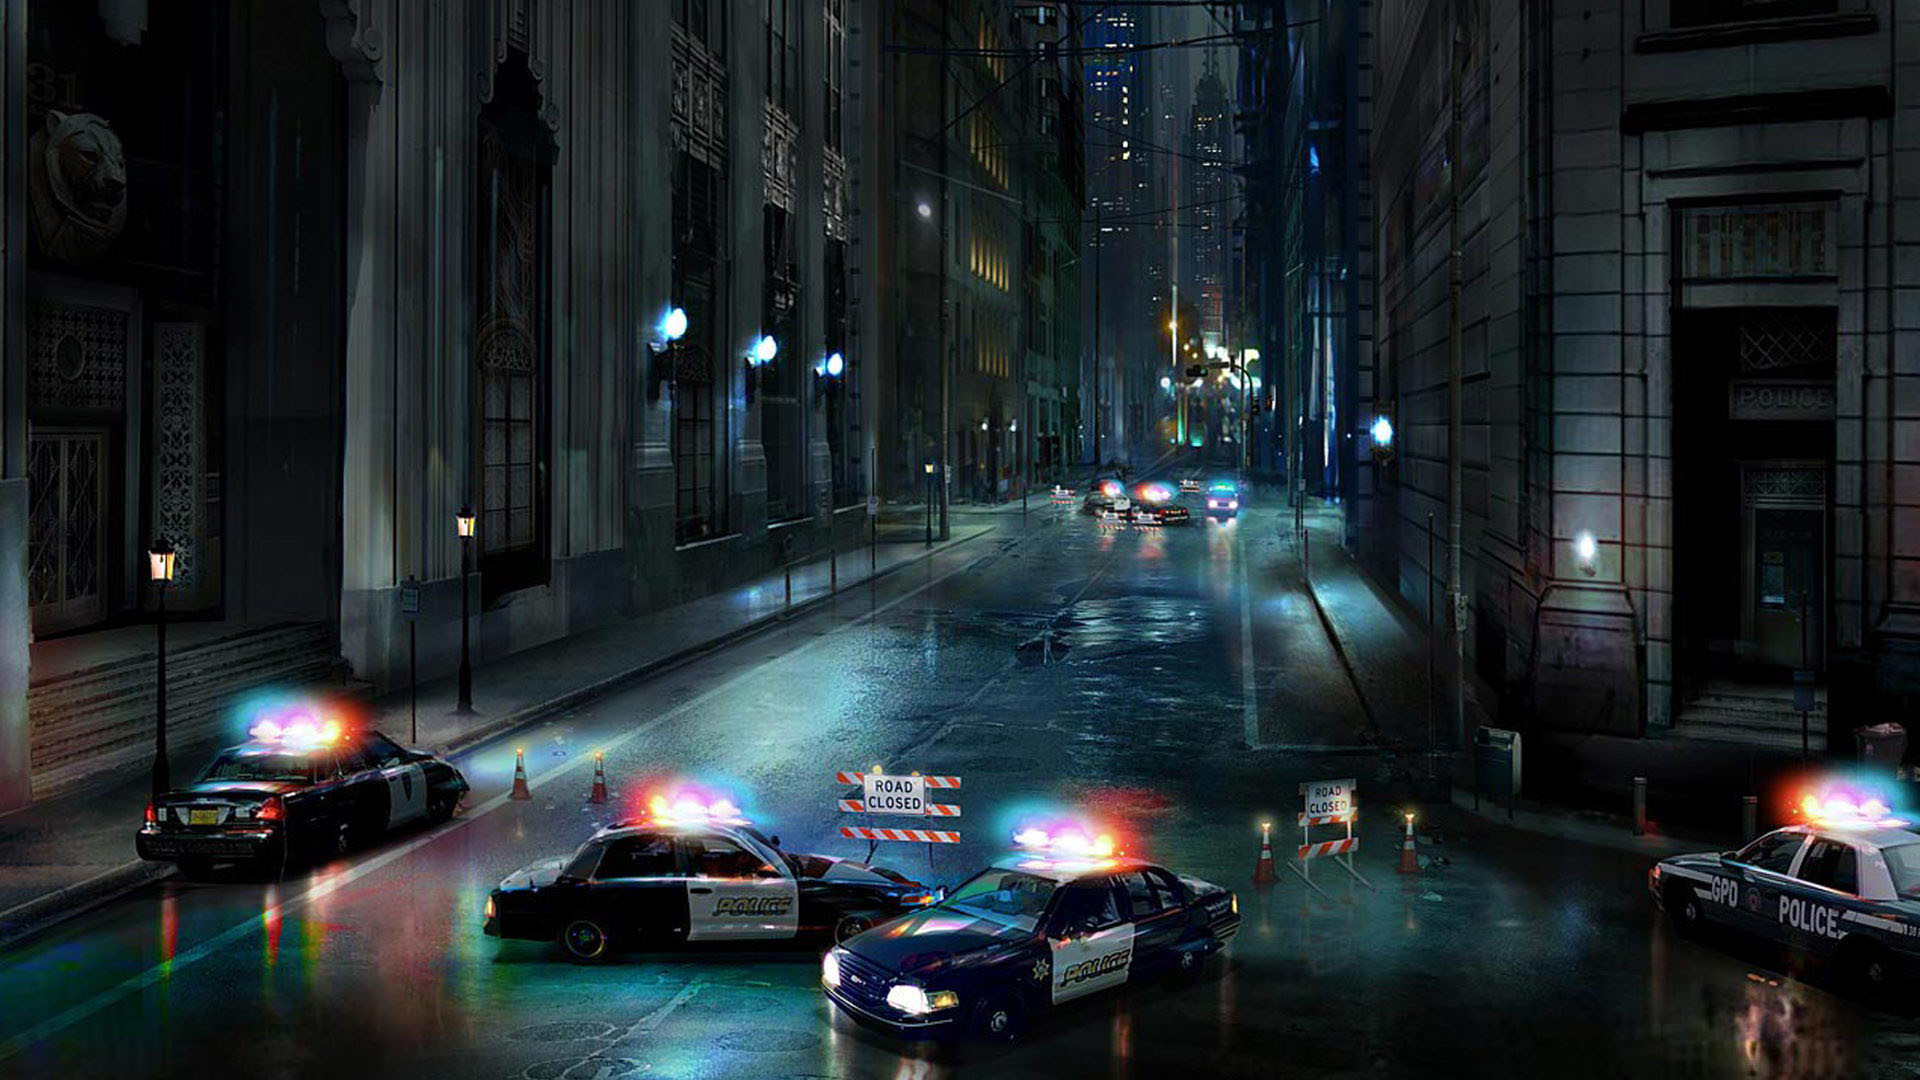 1920x1080 Gotham Scene, Road Closed by the Police  wallpaper